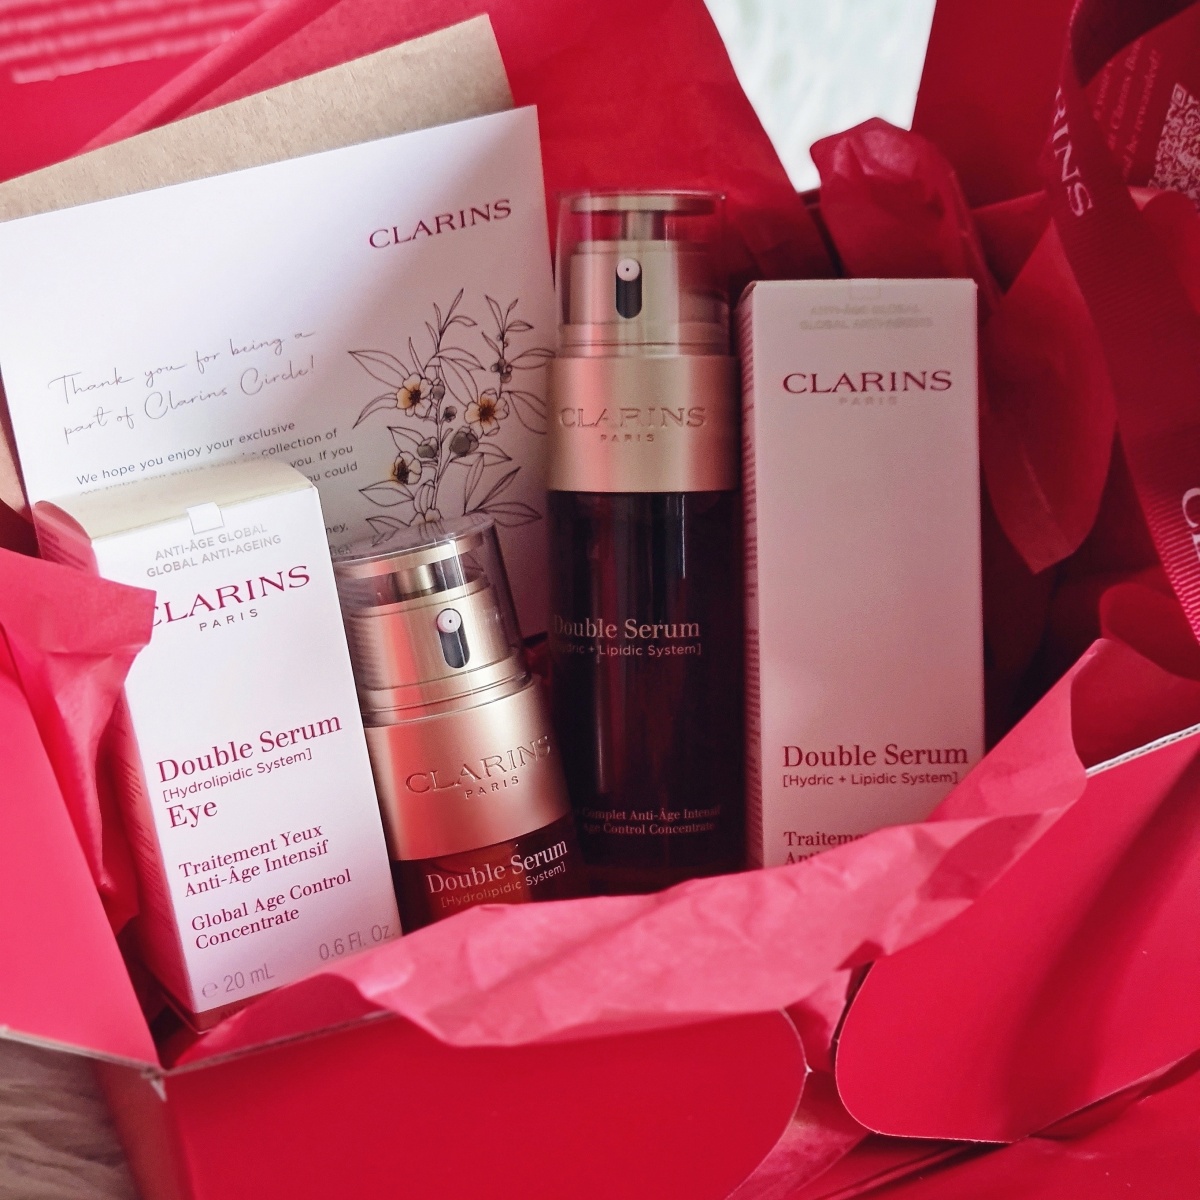 Clarins Double Serum and Double Serum Eye